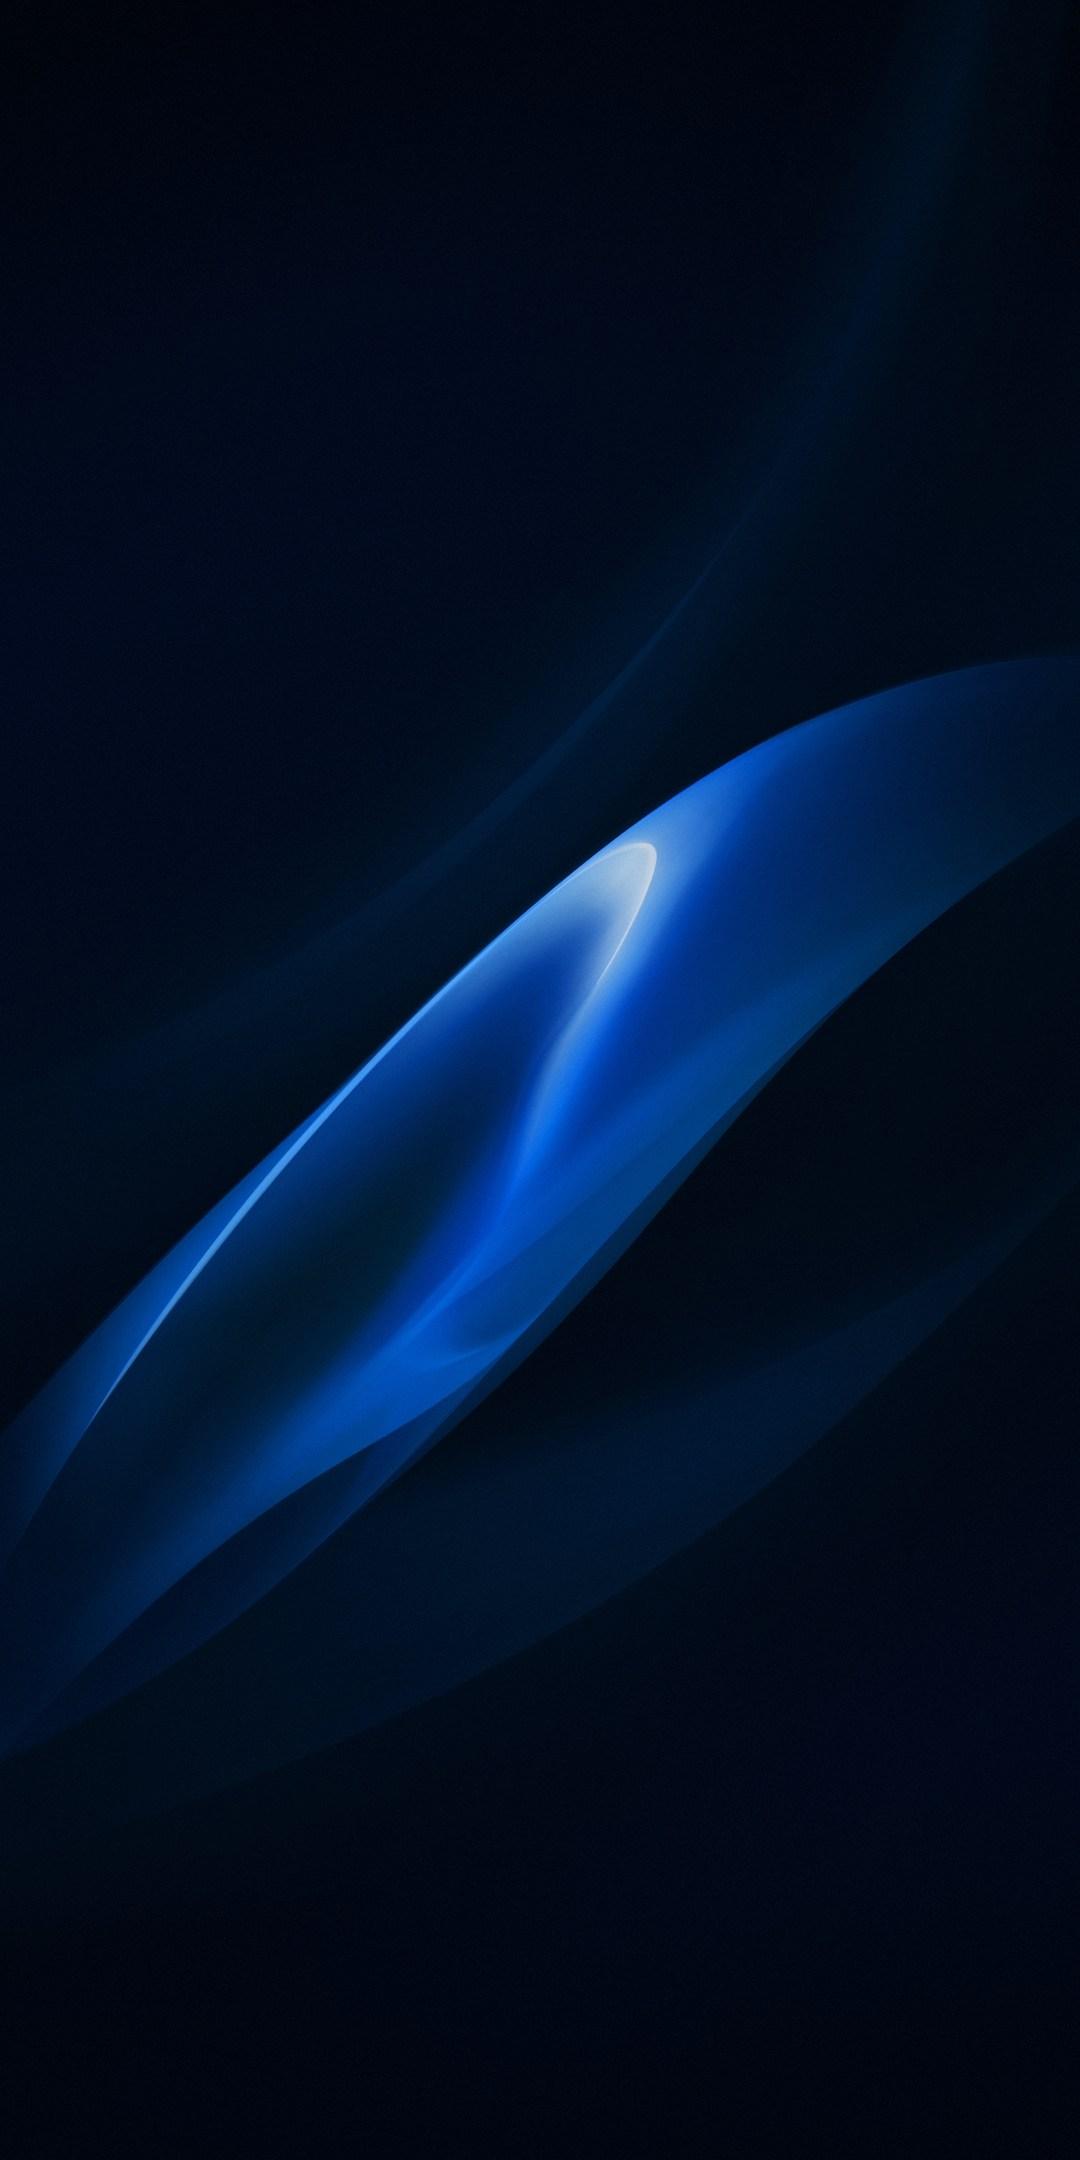 Download Oppo Realme 2 Stock Wallpapers in Full HD